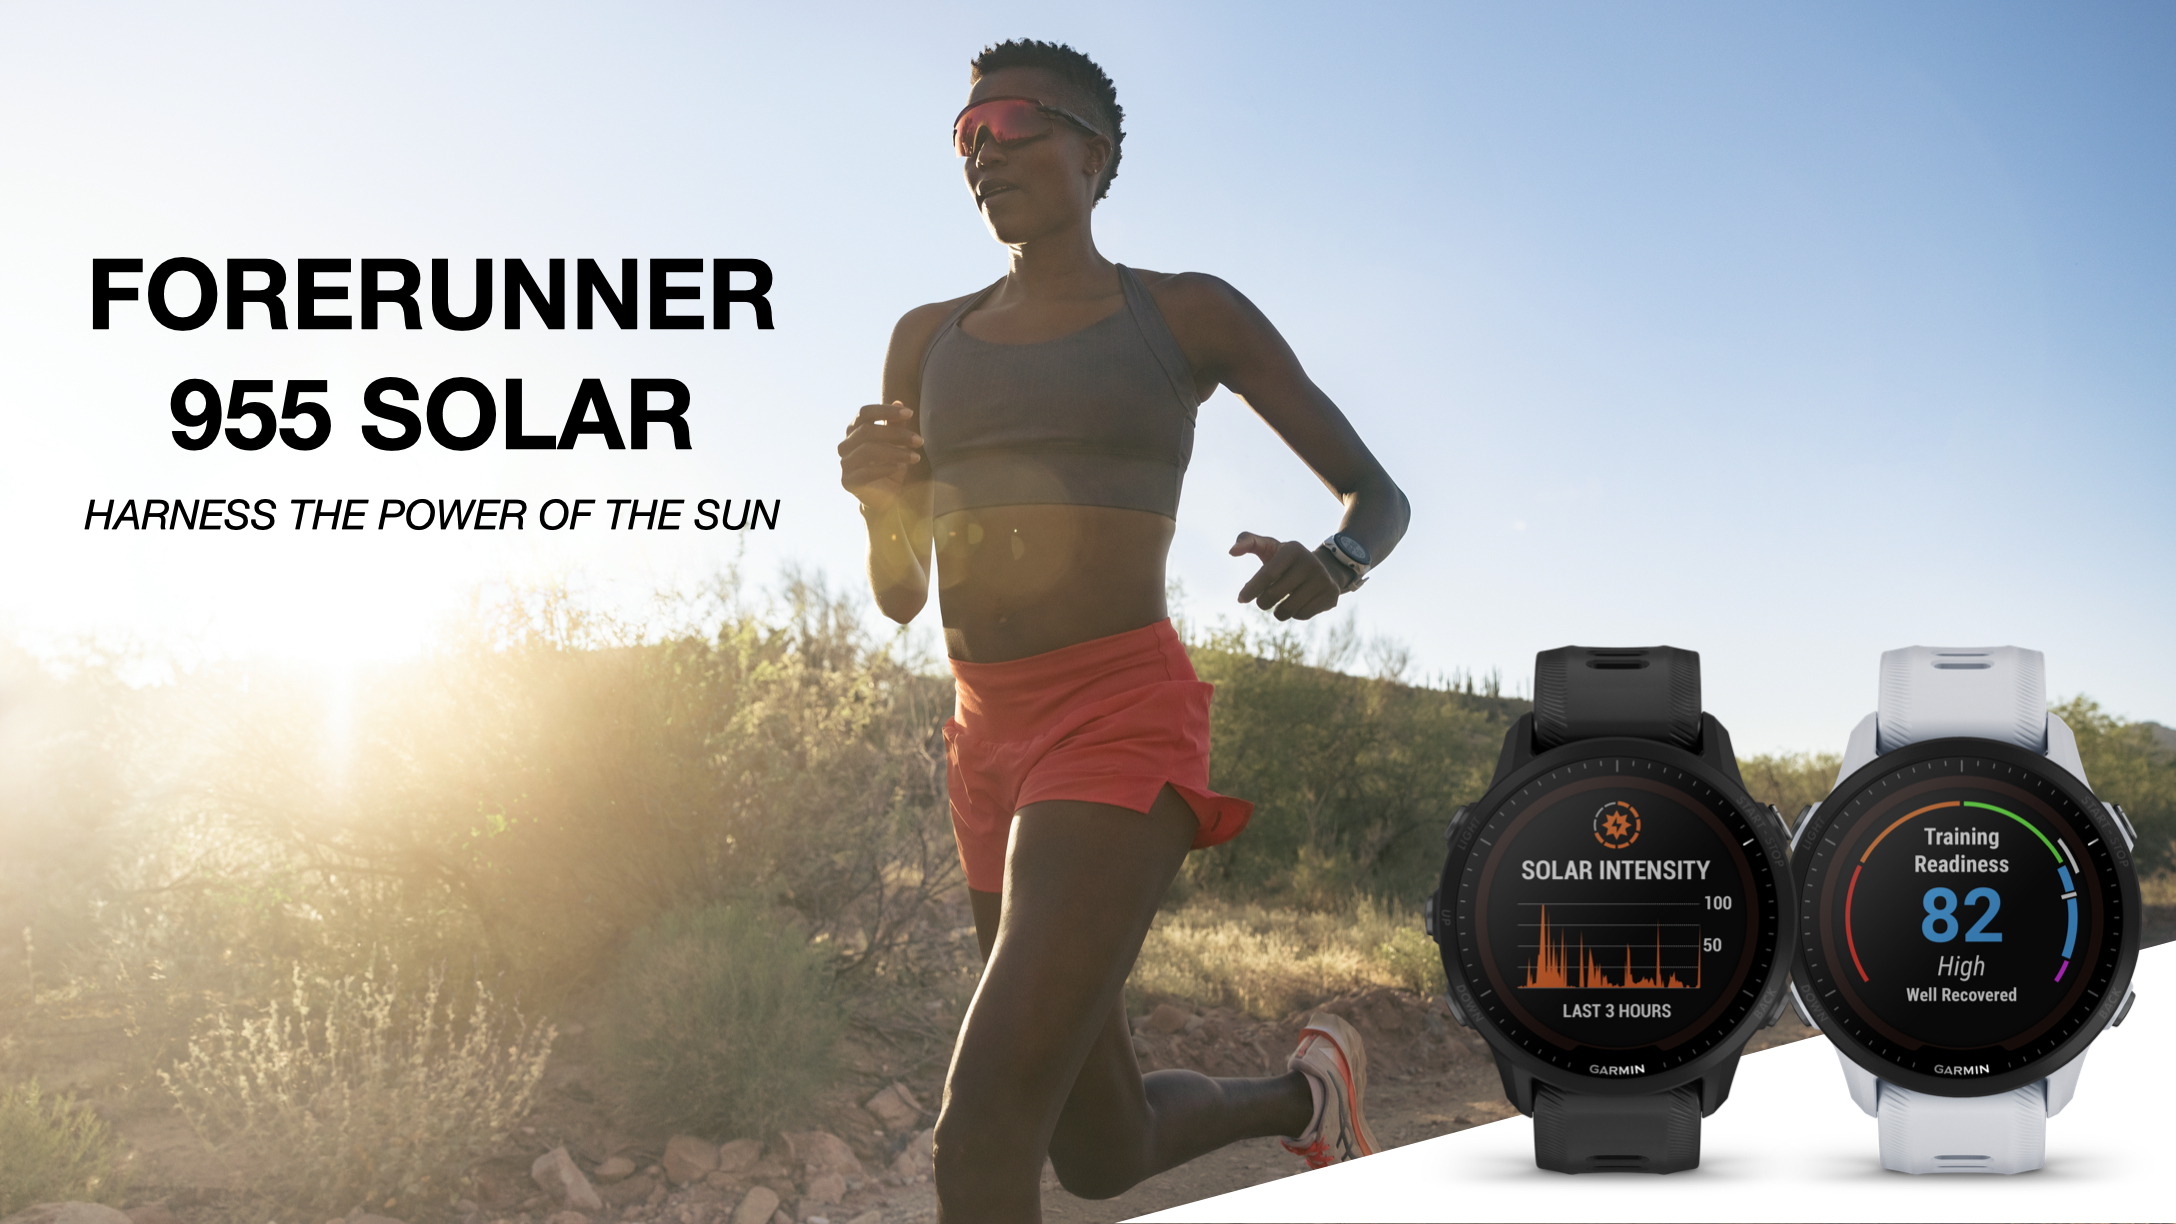 Harness the power of the sun with the Forerunner 955 Solar from Garmin